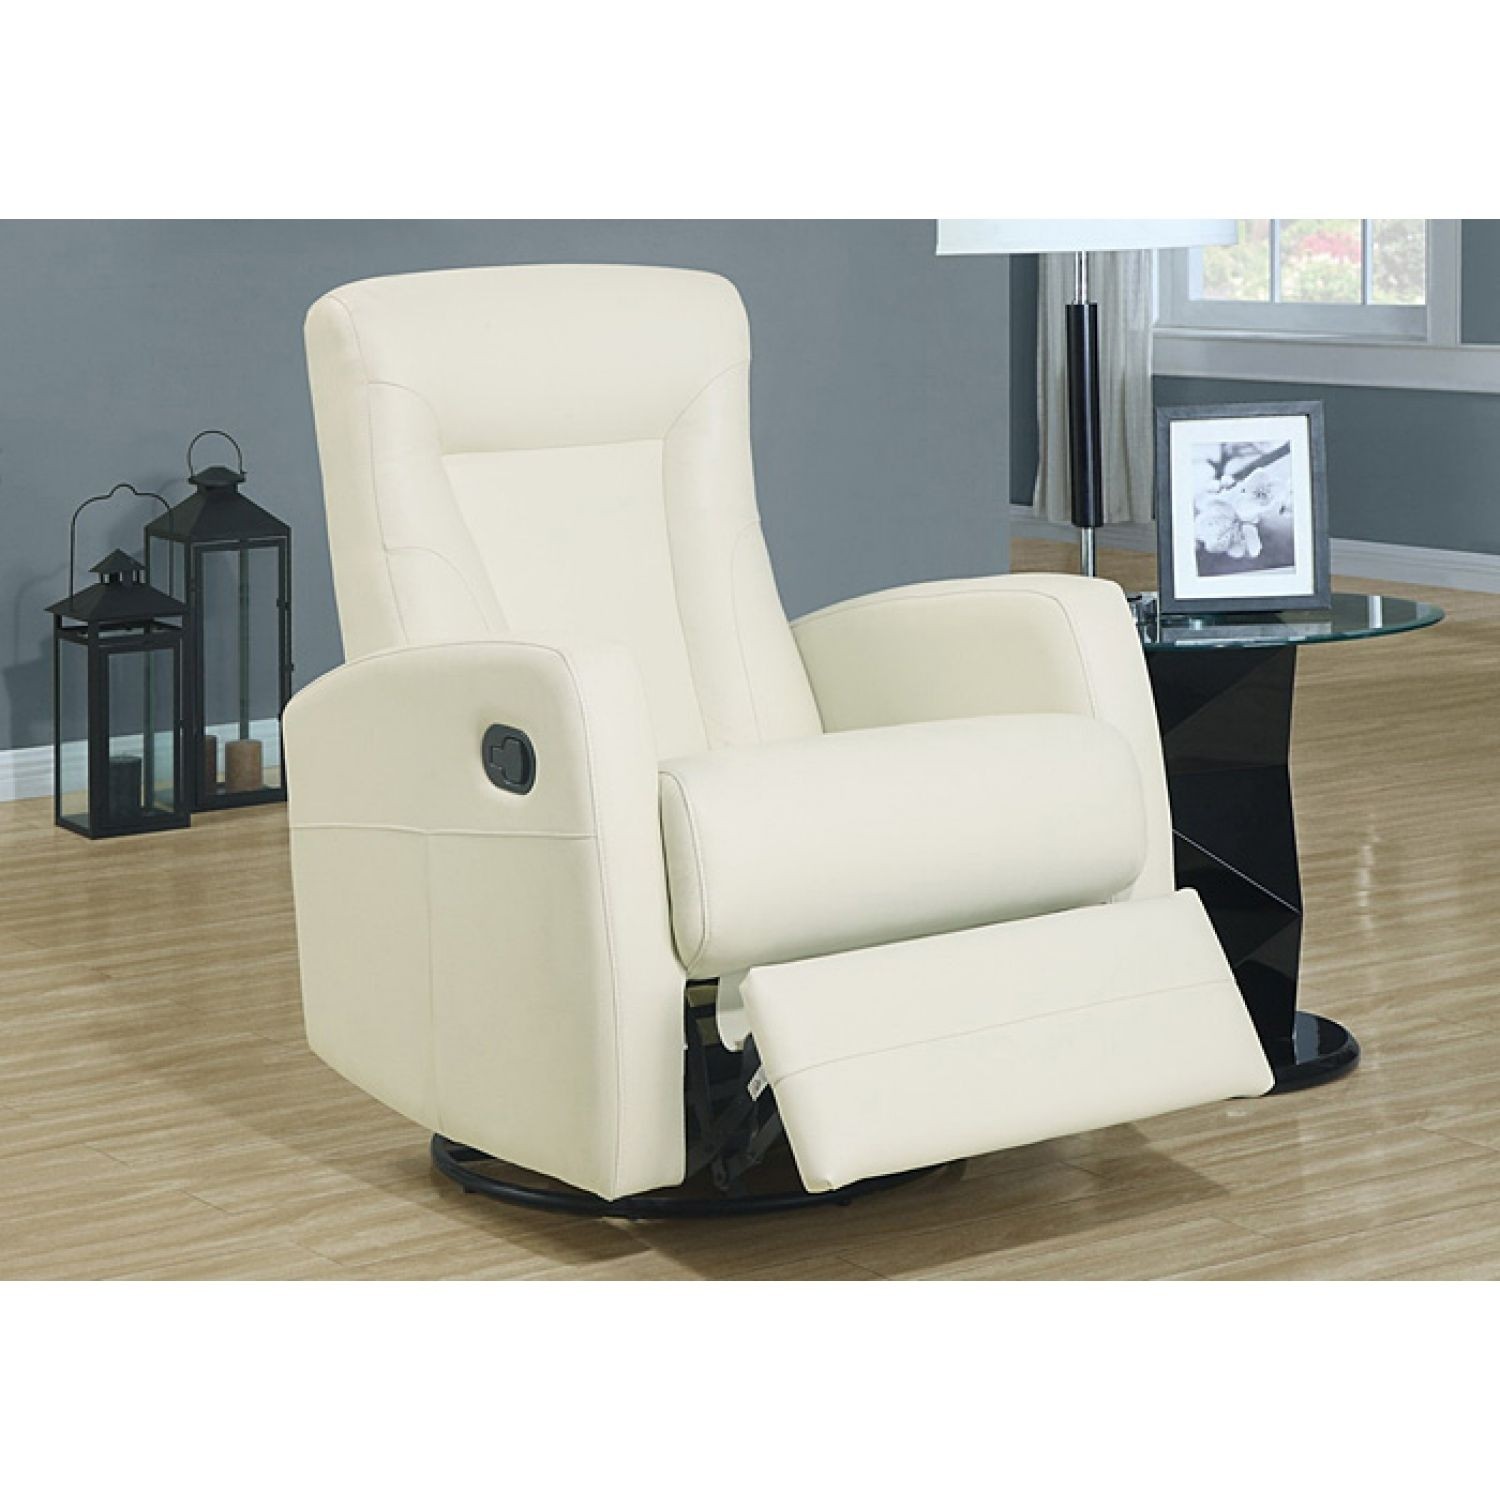 Marti Leather Recliner -